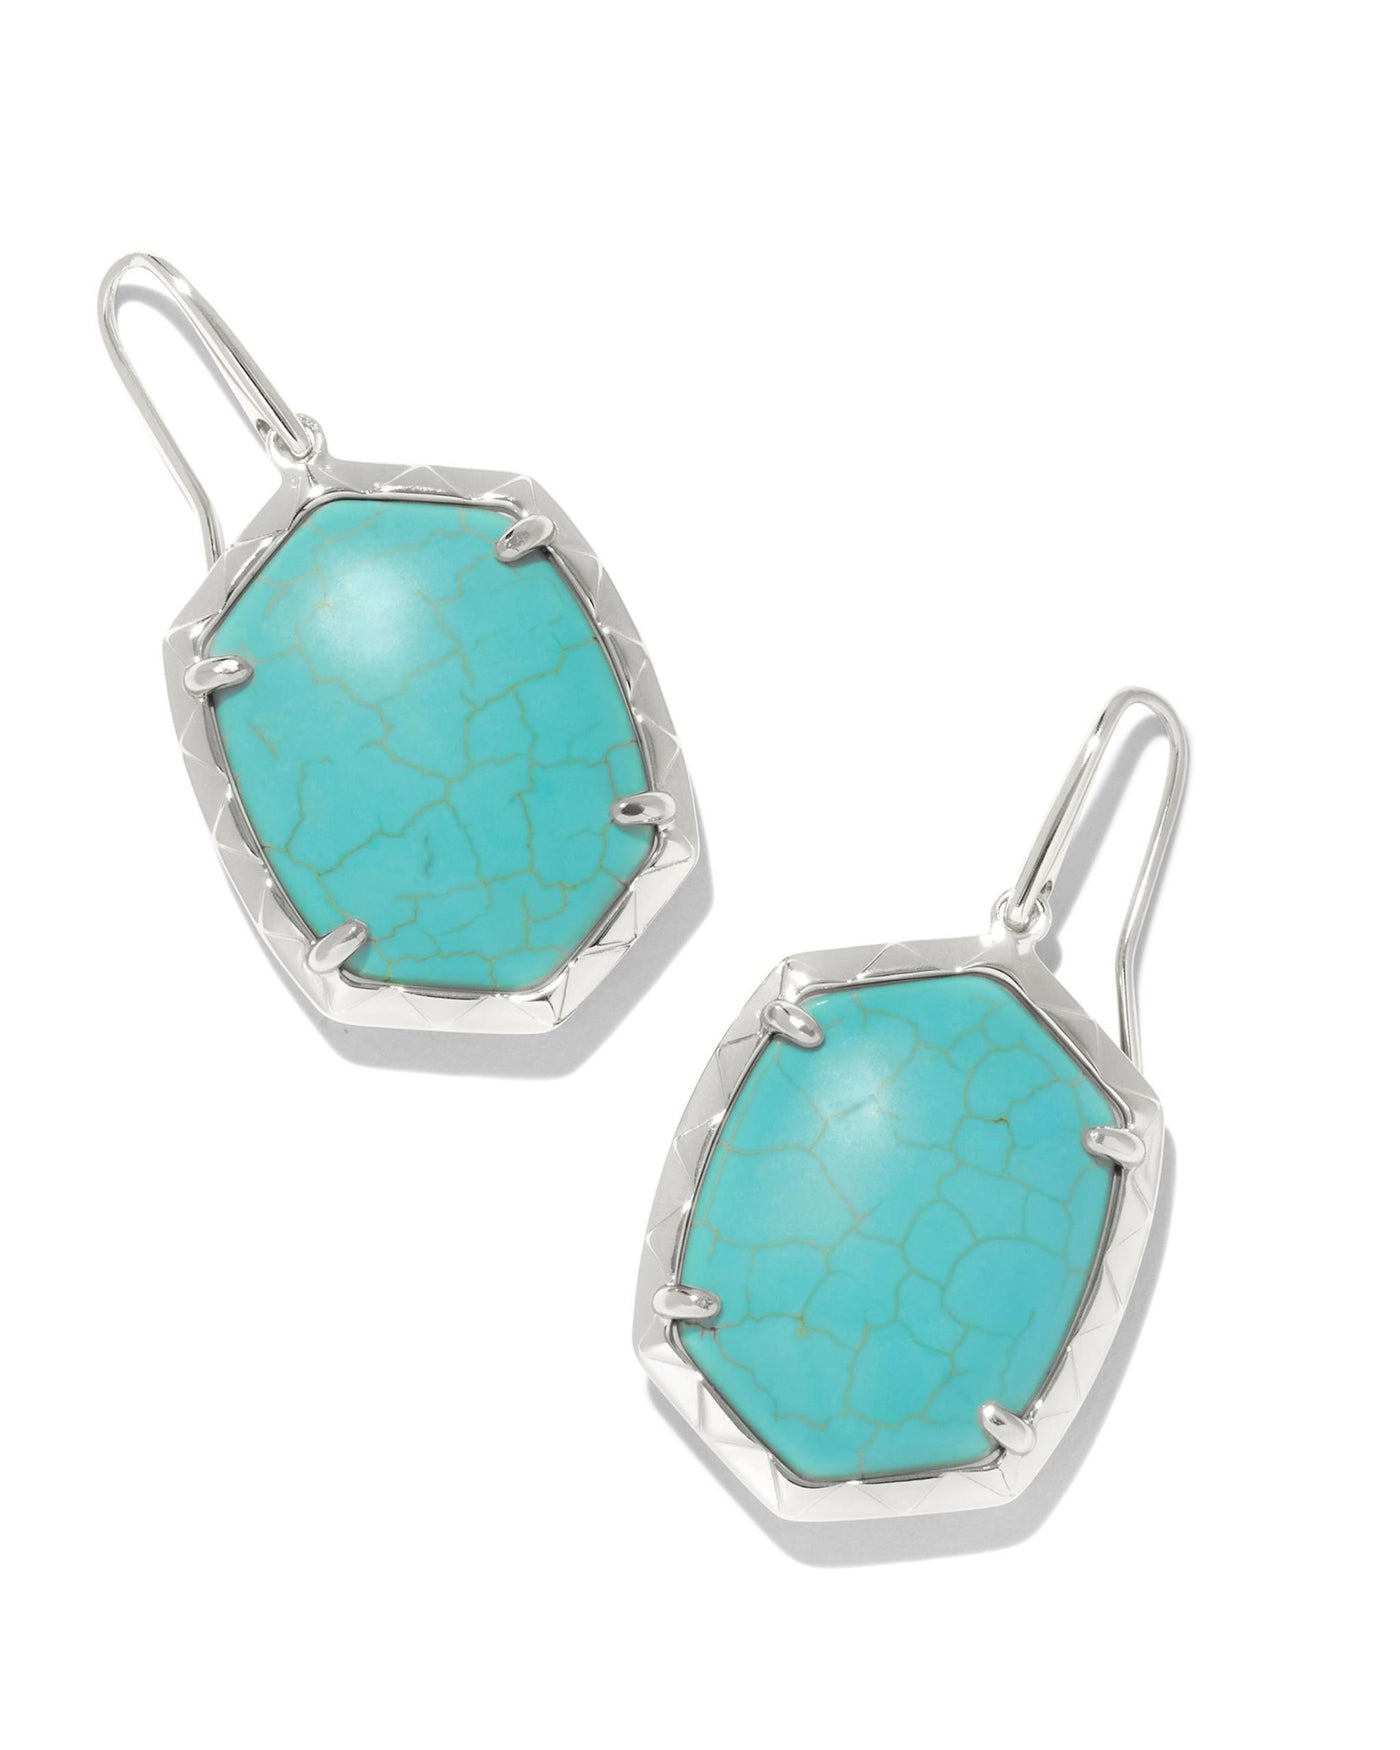 Silver Tone Earrings Featuring Blue/Green Variegated Turquoise Magnesite by Kendra Scott